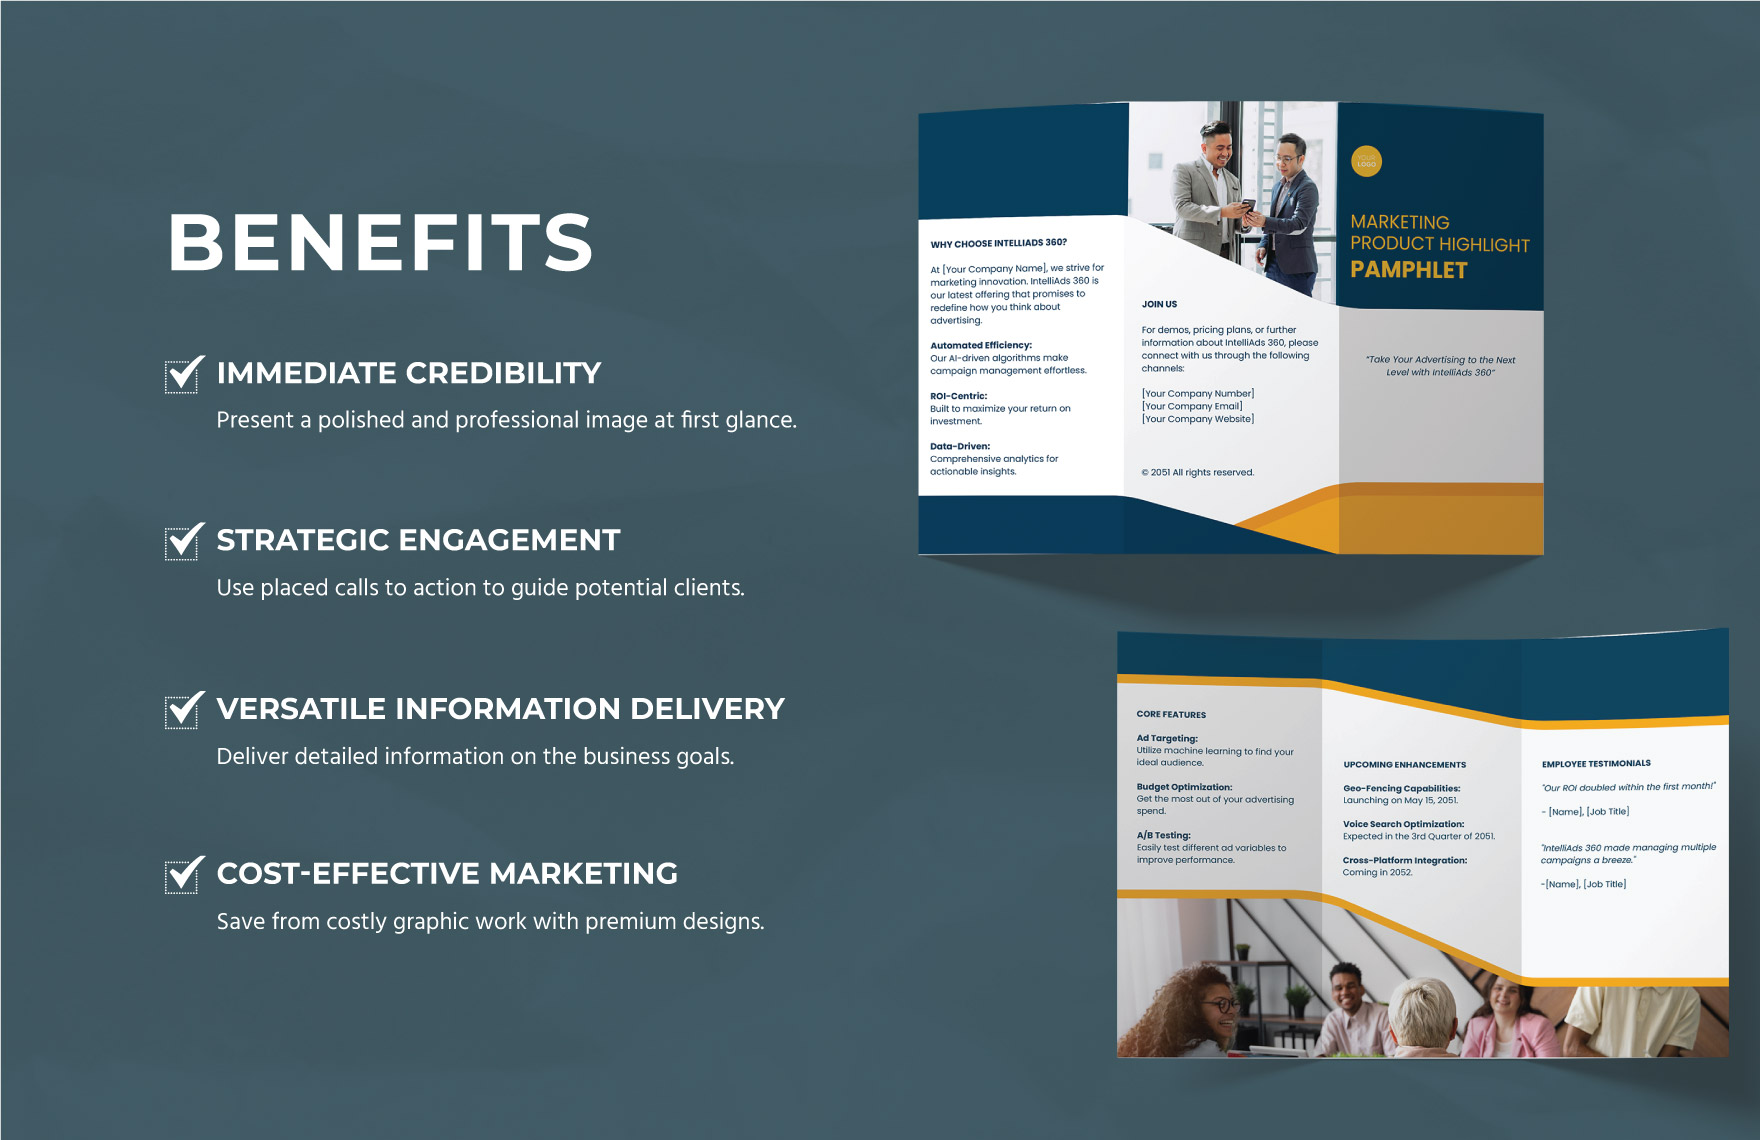 Marketing Product Highlight Pamphlet Template